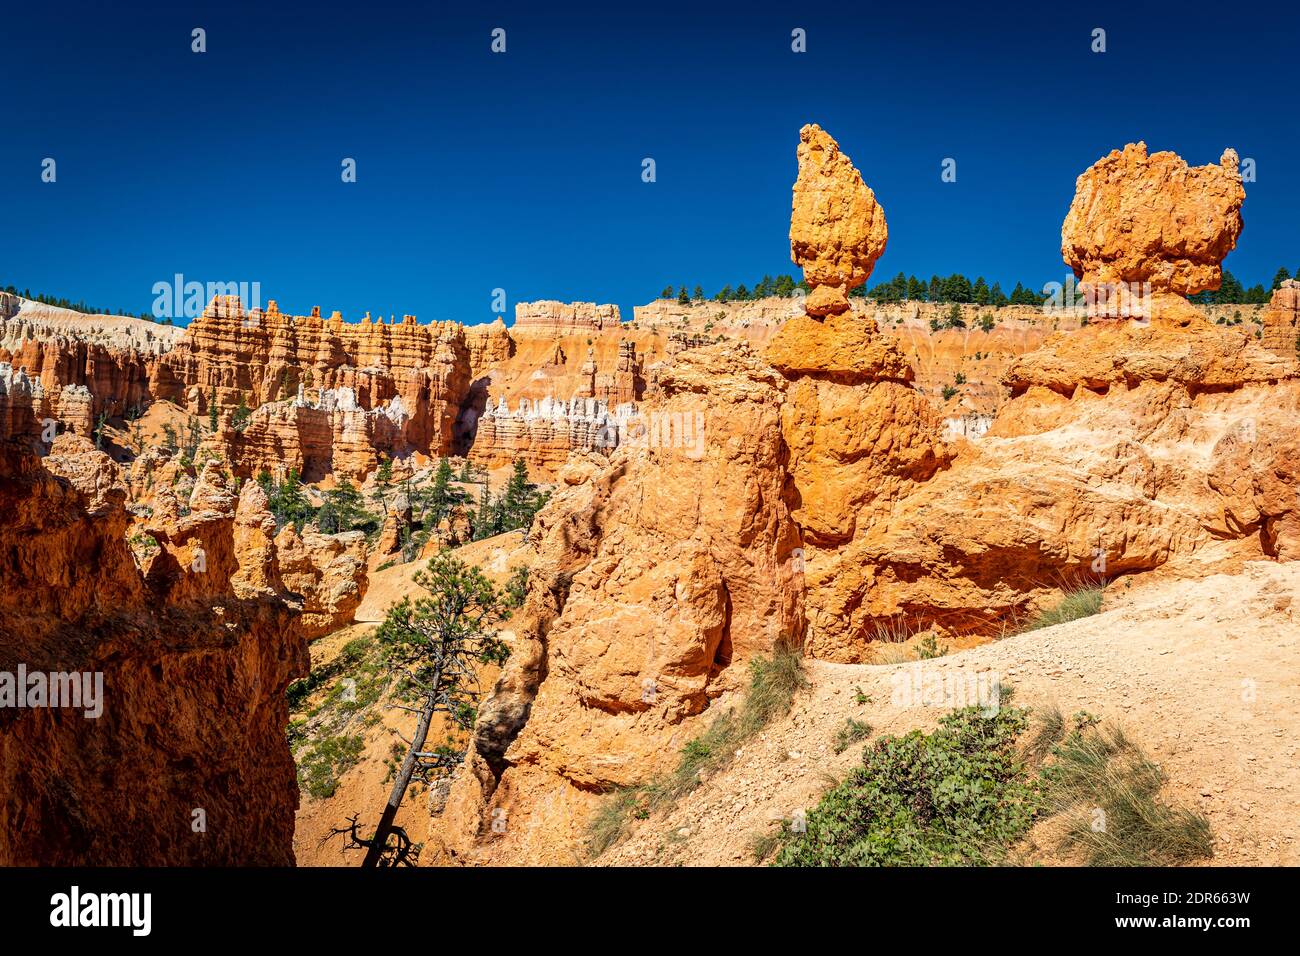 Hoodoos and eroded sandstone formations along the Queen's Garden and Navajo Loop hiking trails at Bryce Canyon National Park in Utah. Stock Photo